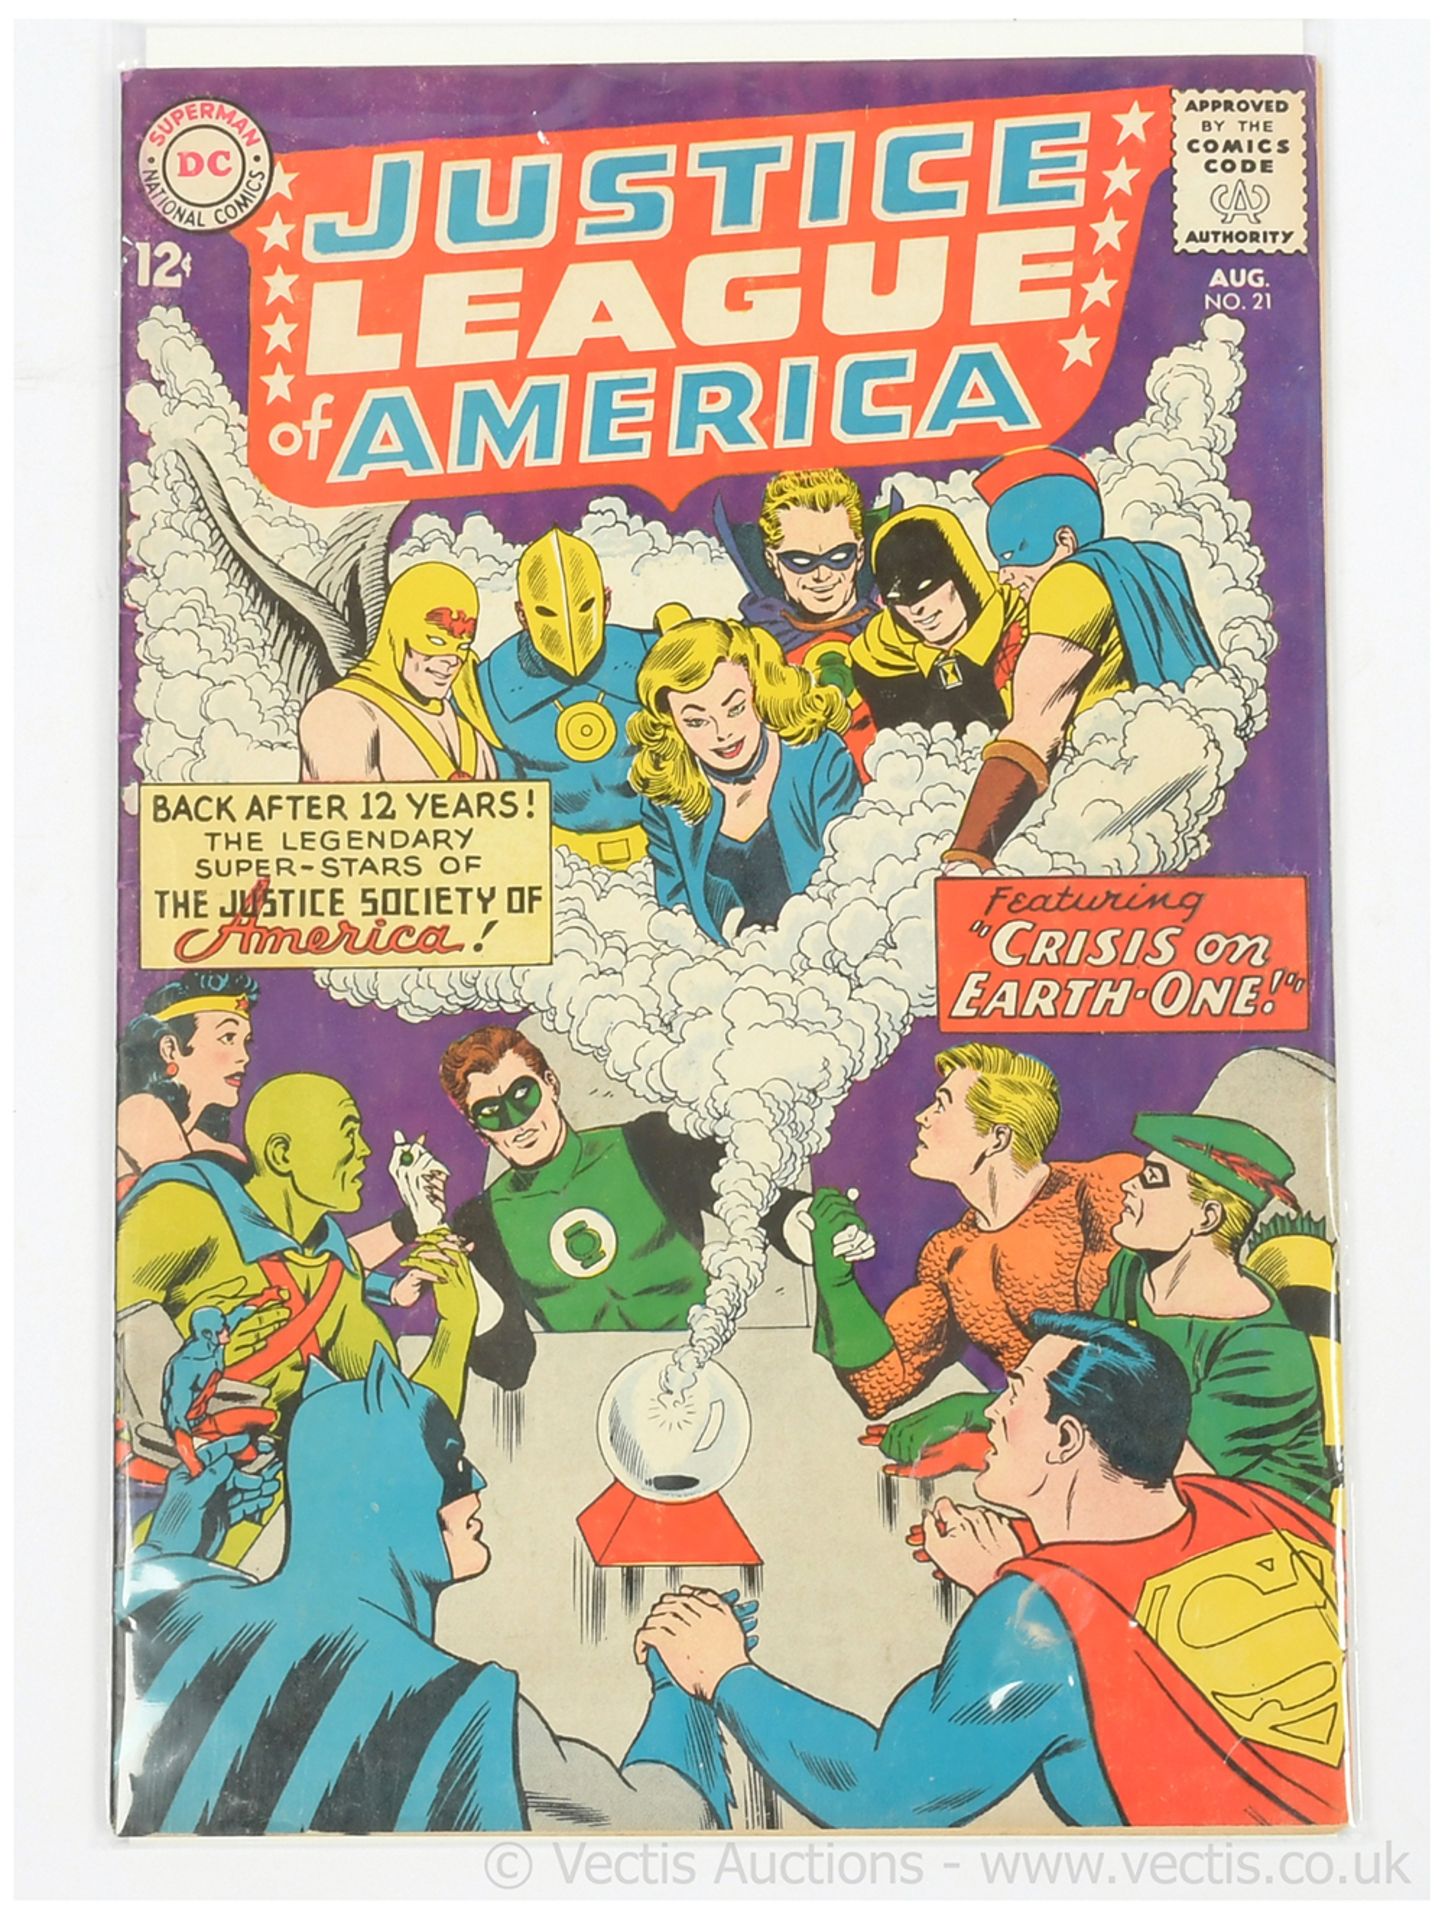 DC Justice League of America #21, August 1963,